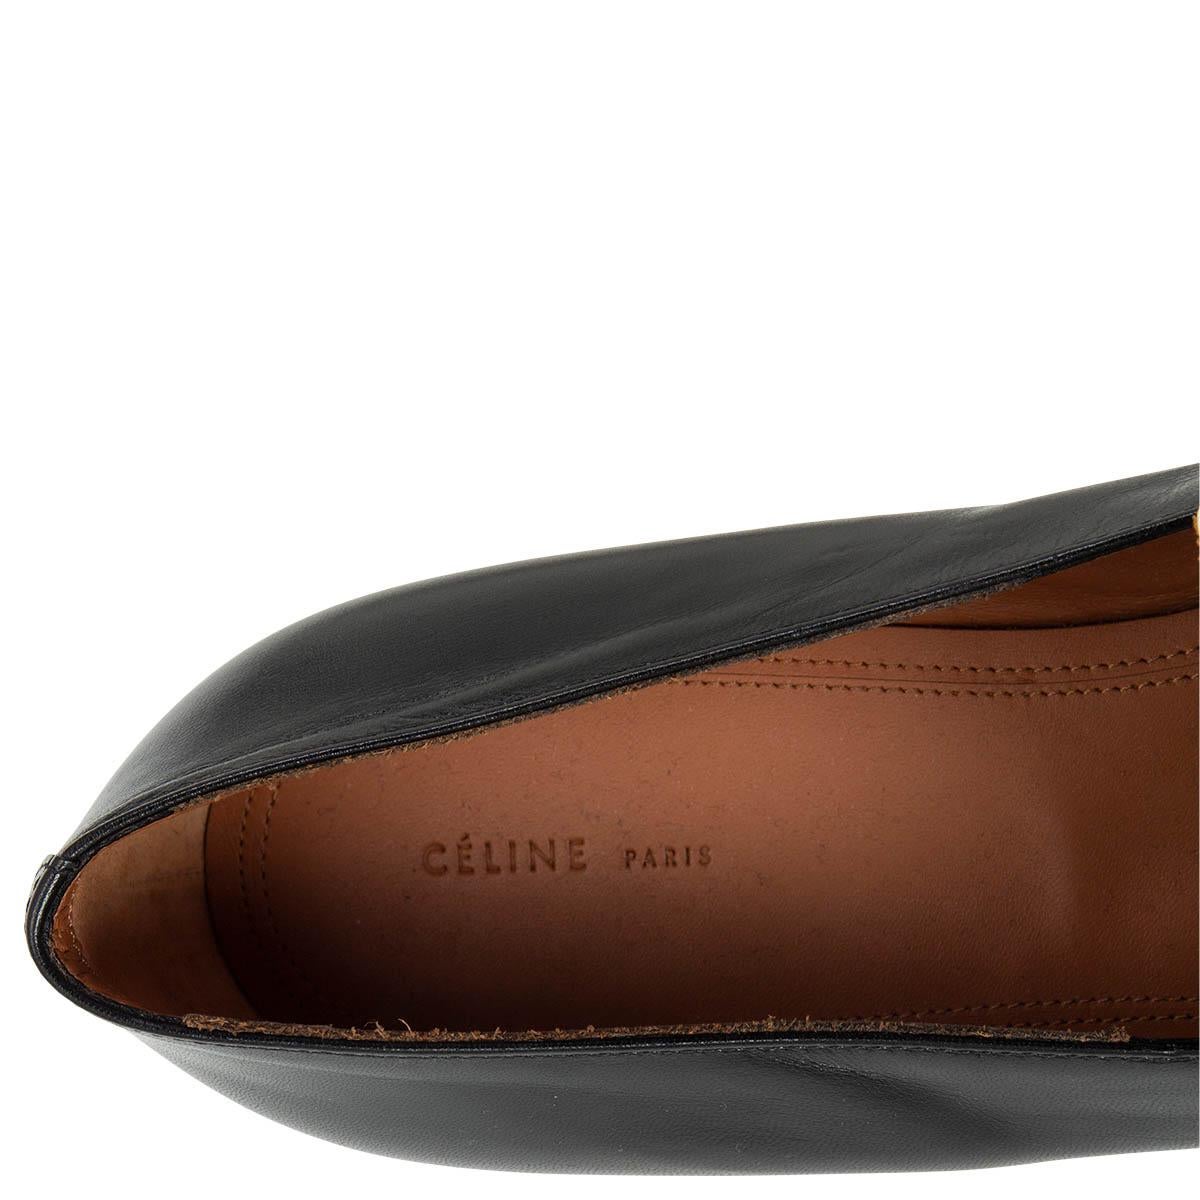 Black CELINE black & white leather POINTED TOE Loafers Flats Shoes 41 For Sale